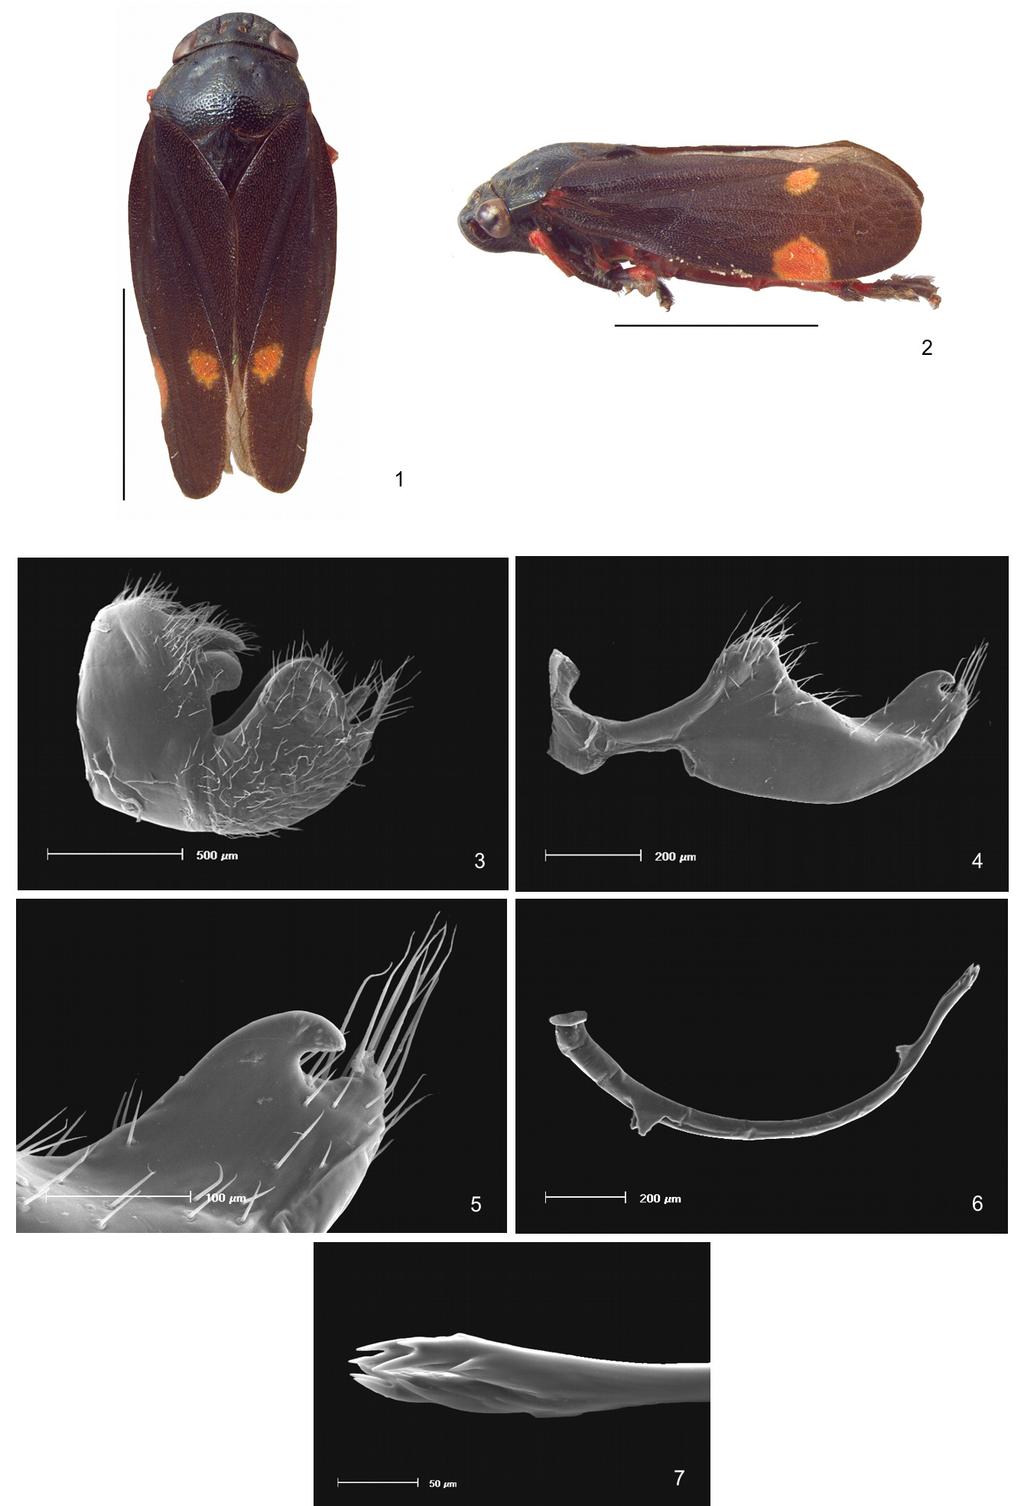 Figs. 1-7. Deois (Deois) bisignata sp. n. 1, dorsal view. 2, lateral view (scale= 3mm).